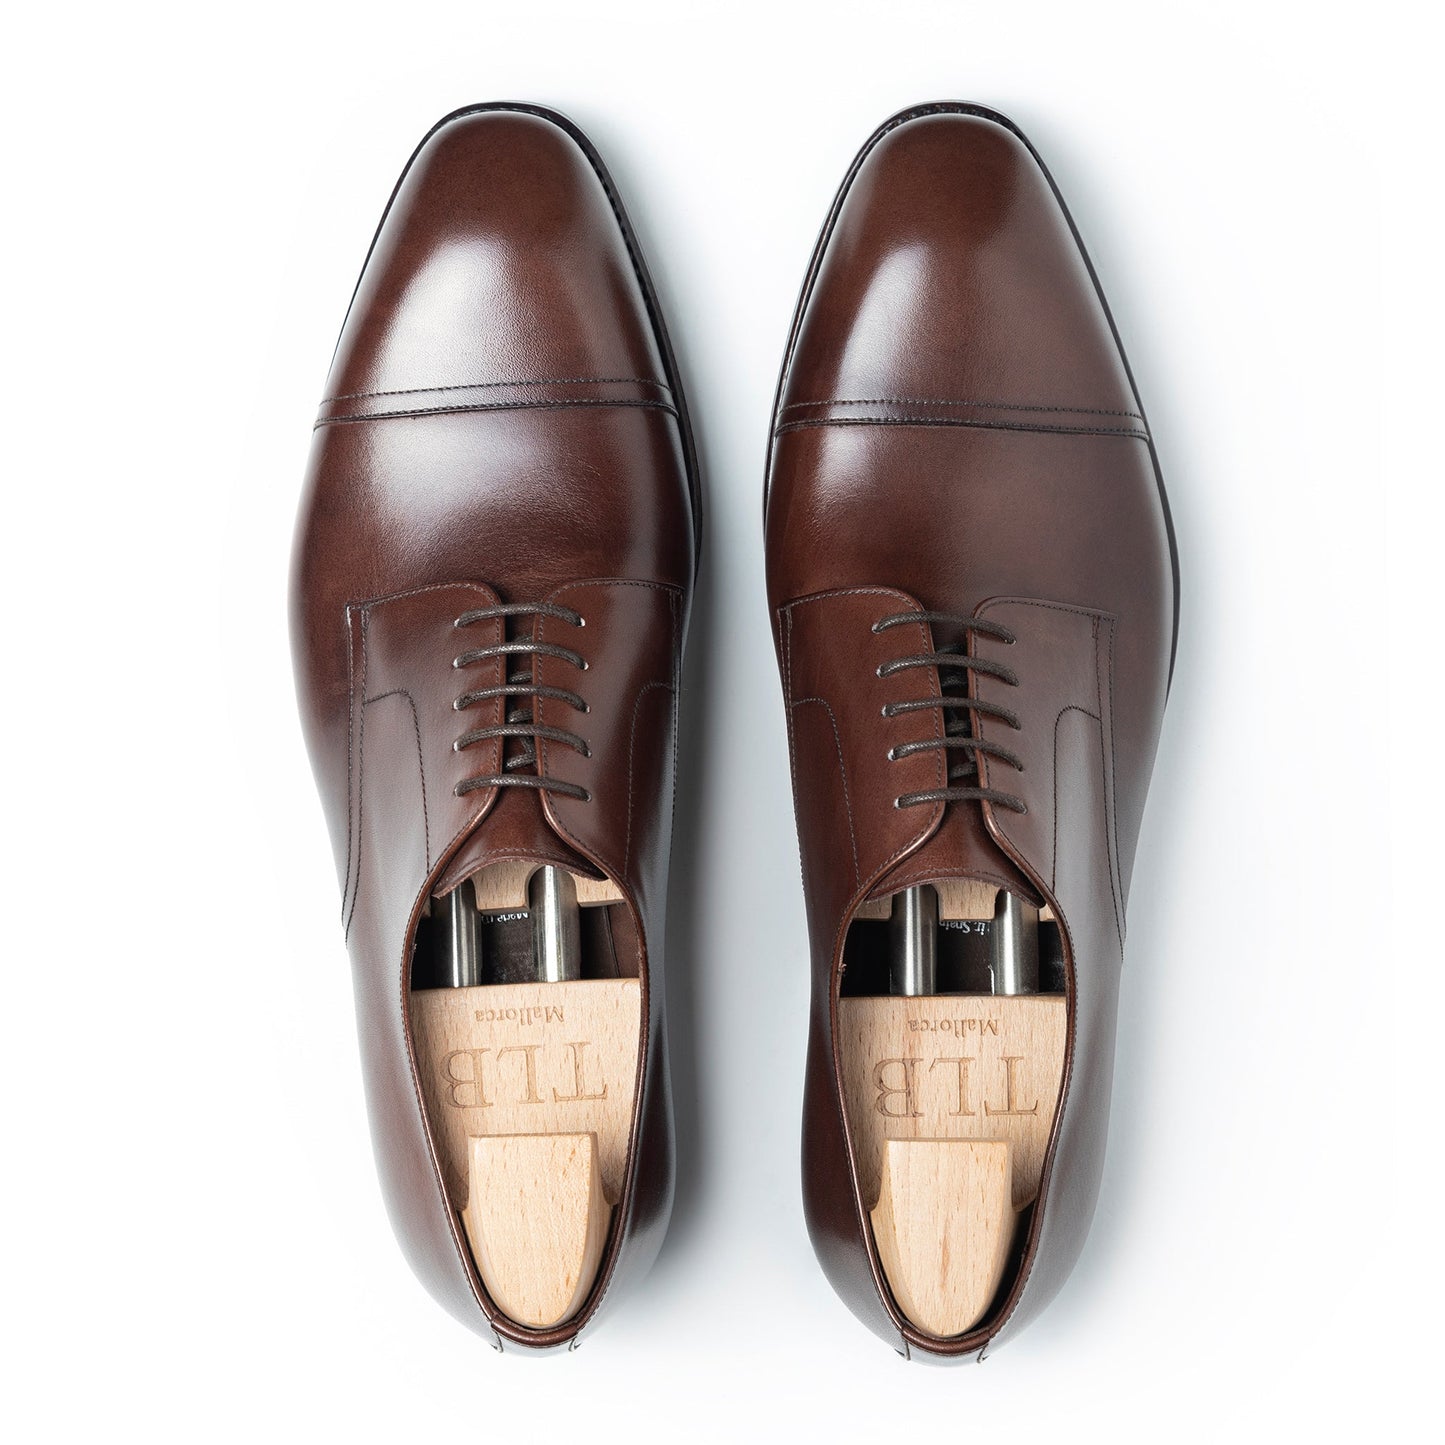 TLB Mallorca  Leather Men's Derby shoes made in Spain